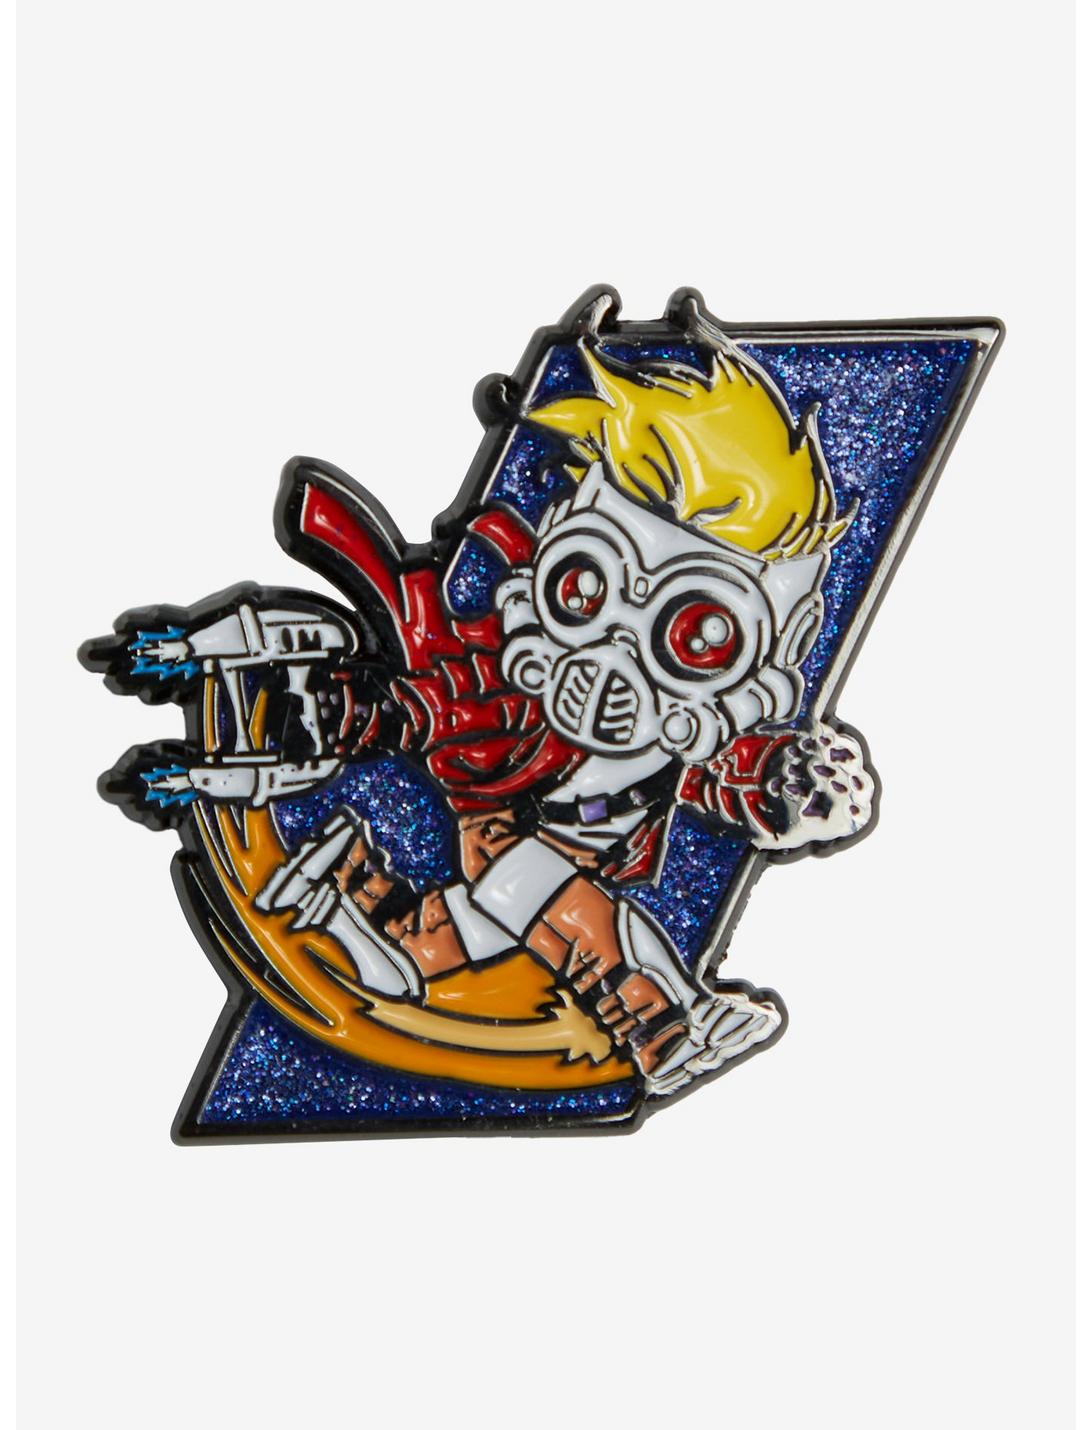 Marvel Guardians of the Galaxy Star-Lord Glitter Enamel Pin - BoxLunch Exclusive, , hi-res